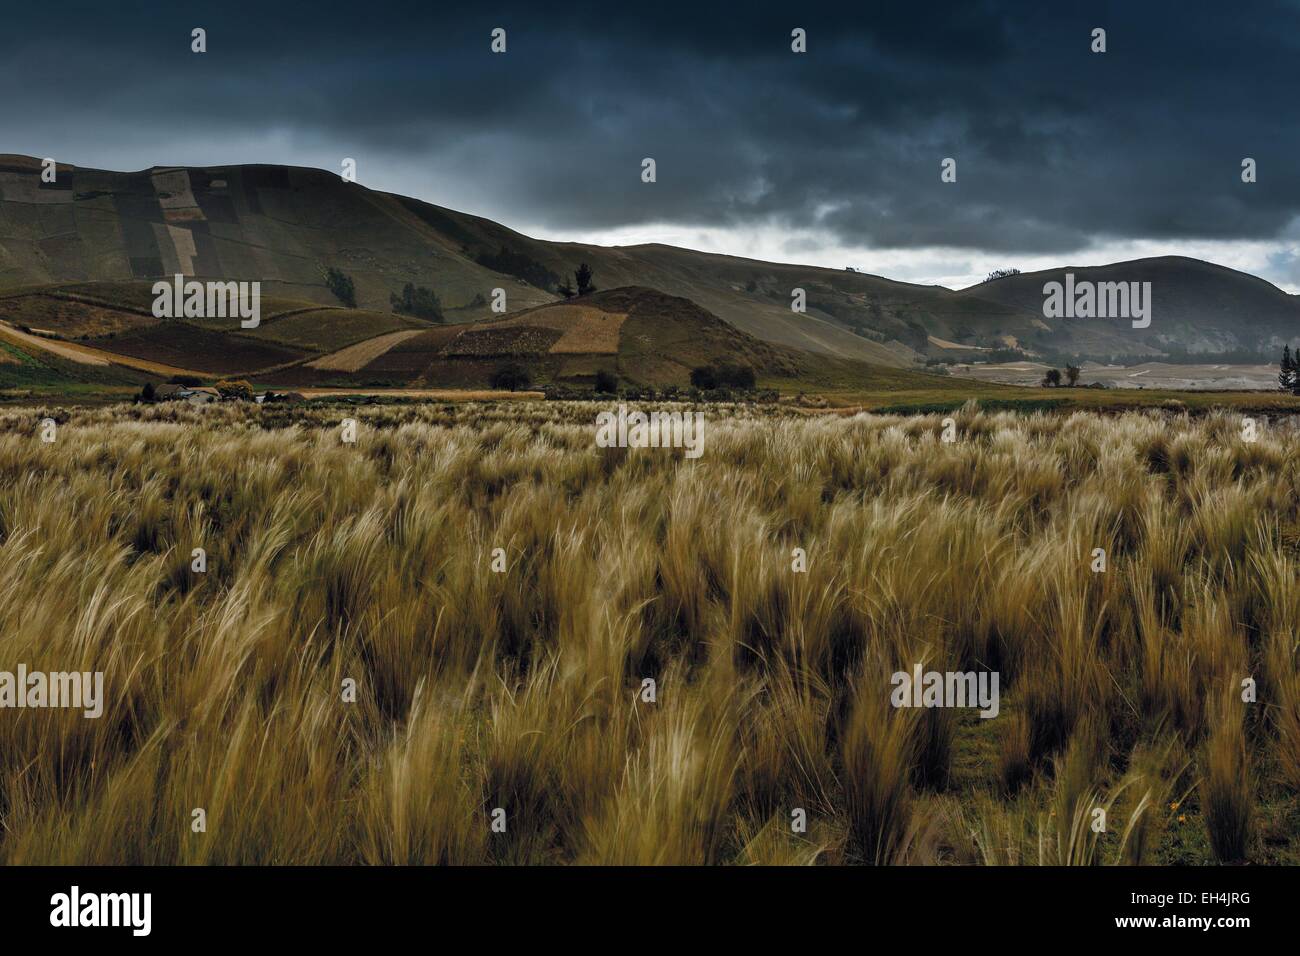 Ecuador, Cotopaxi, Tigua, Andean landscape of a plain in a mountainous setting under a stormy sky at sunset Stock Photo